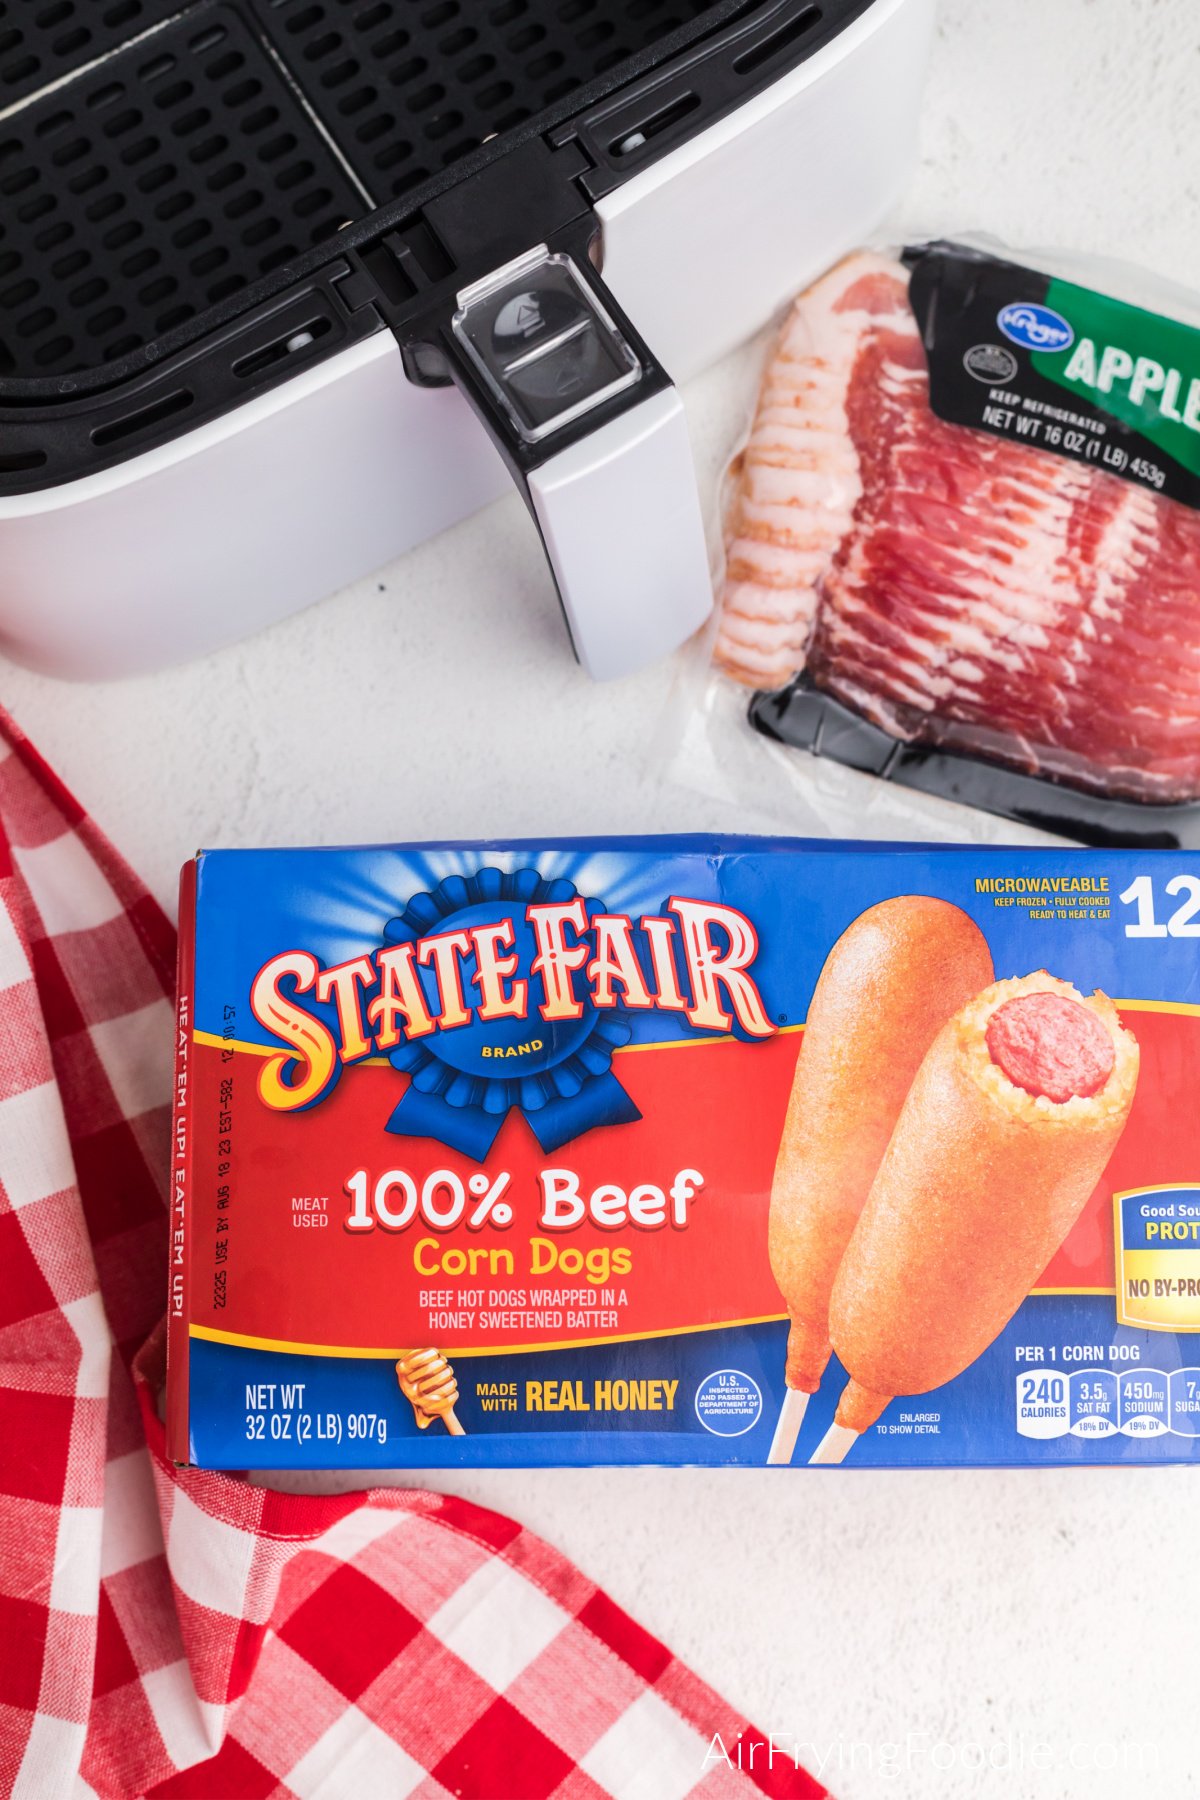 Package of bacon, frozen corn dogs, and basket of an air fryer on a white table.
